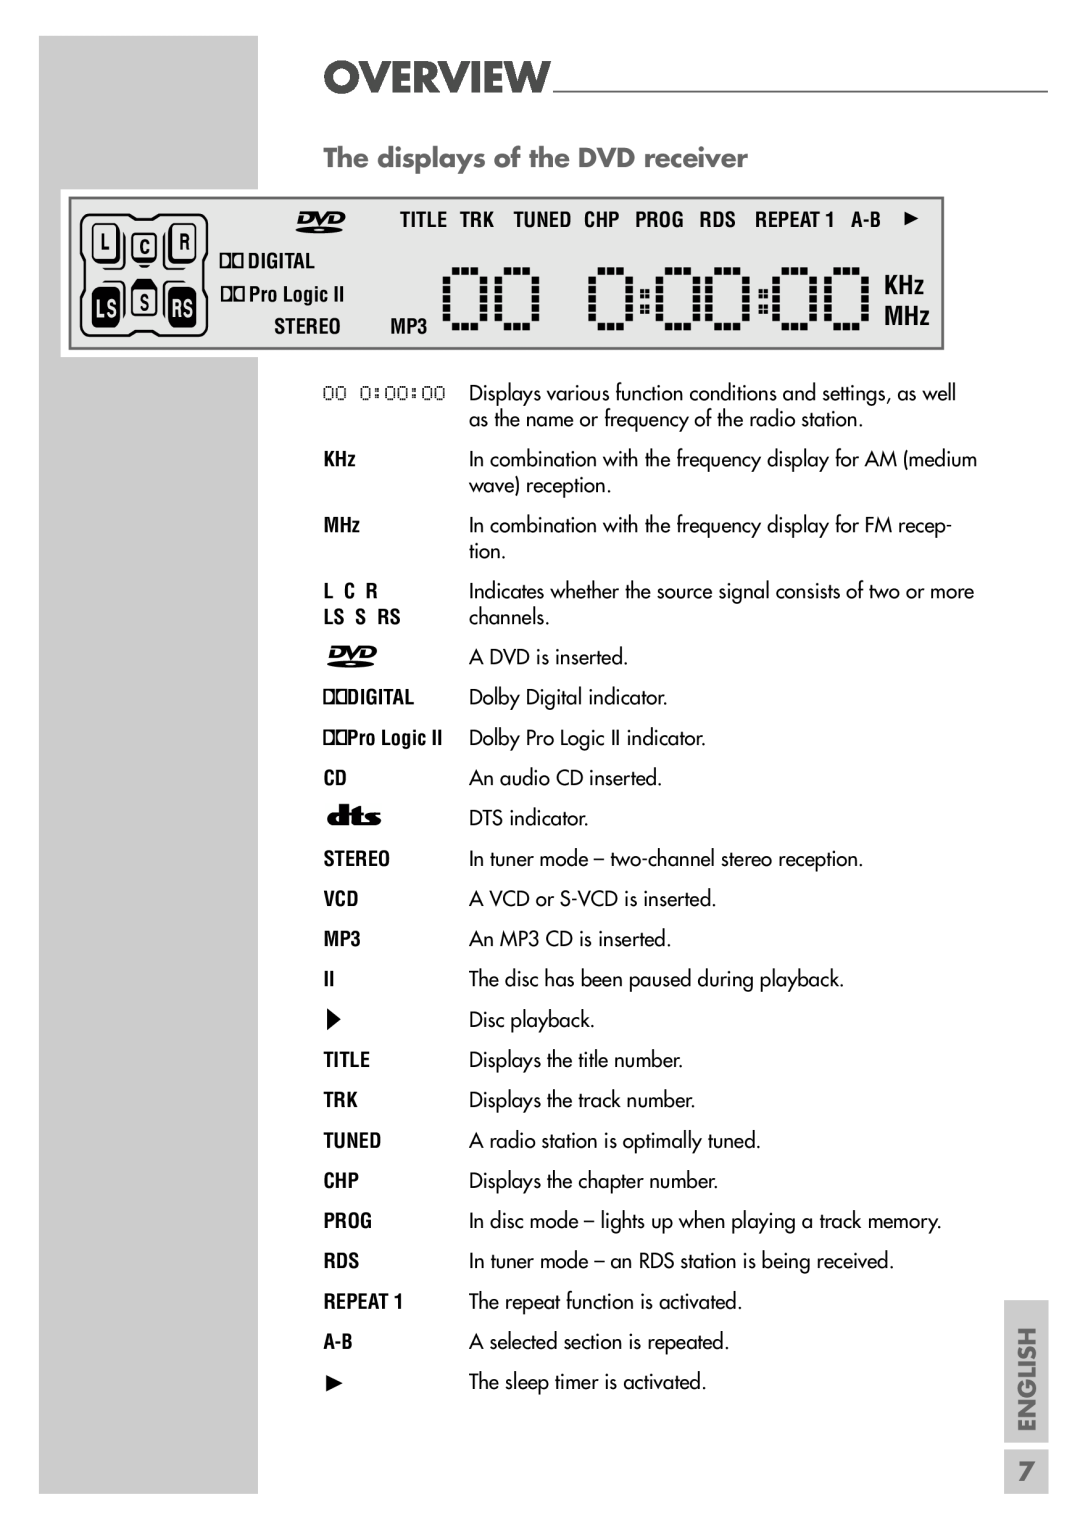 Grundig DR 5400 DD manual The displays of the DVD receiver, wave reception, channels, MP3 00 0 00 00MHz 